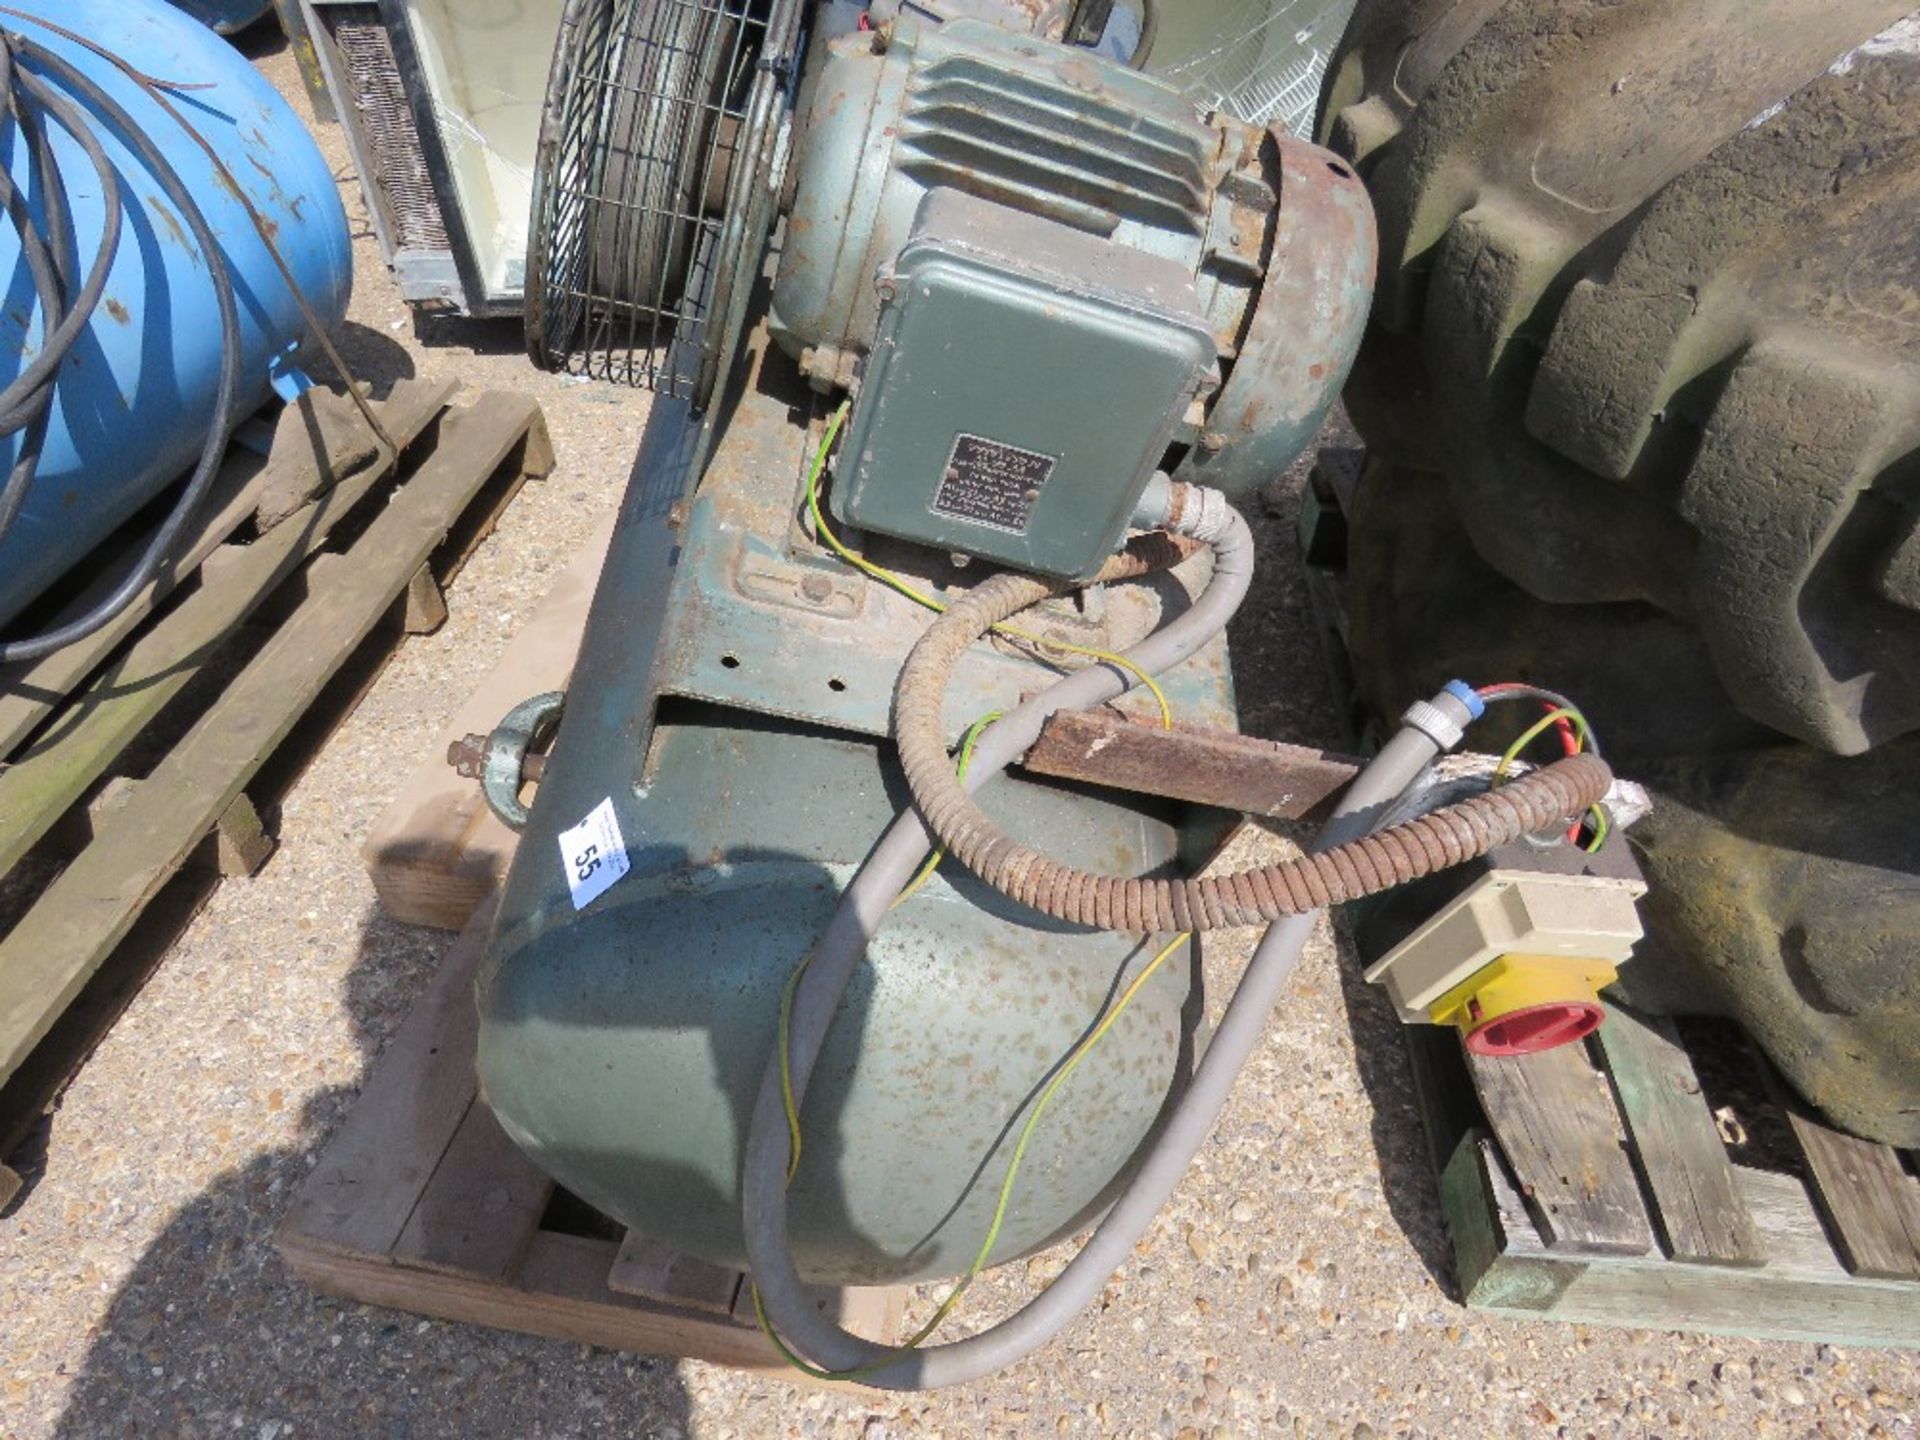 GREEN COLOURED 240VOLT WORKSHOP COMPRESSOR. SOURCED FROM SITE CLEARANCE, UNTESTED, CONDITION UNKNOW - Image 2 of 4